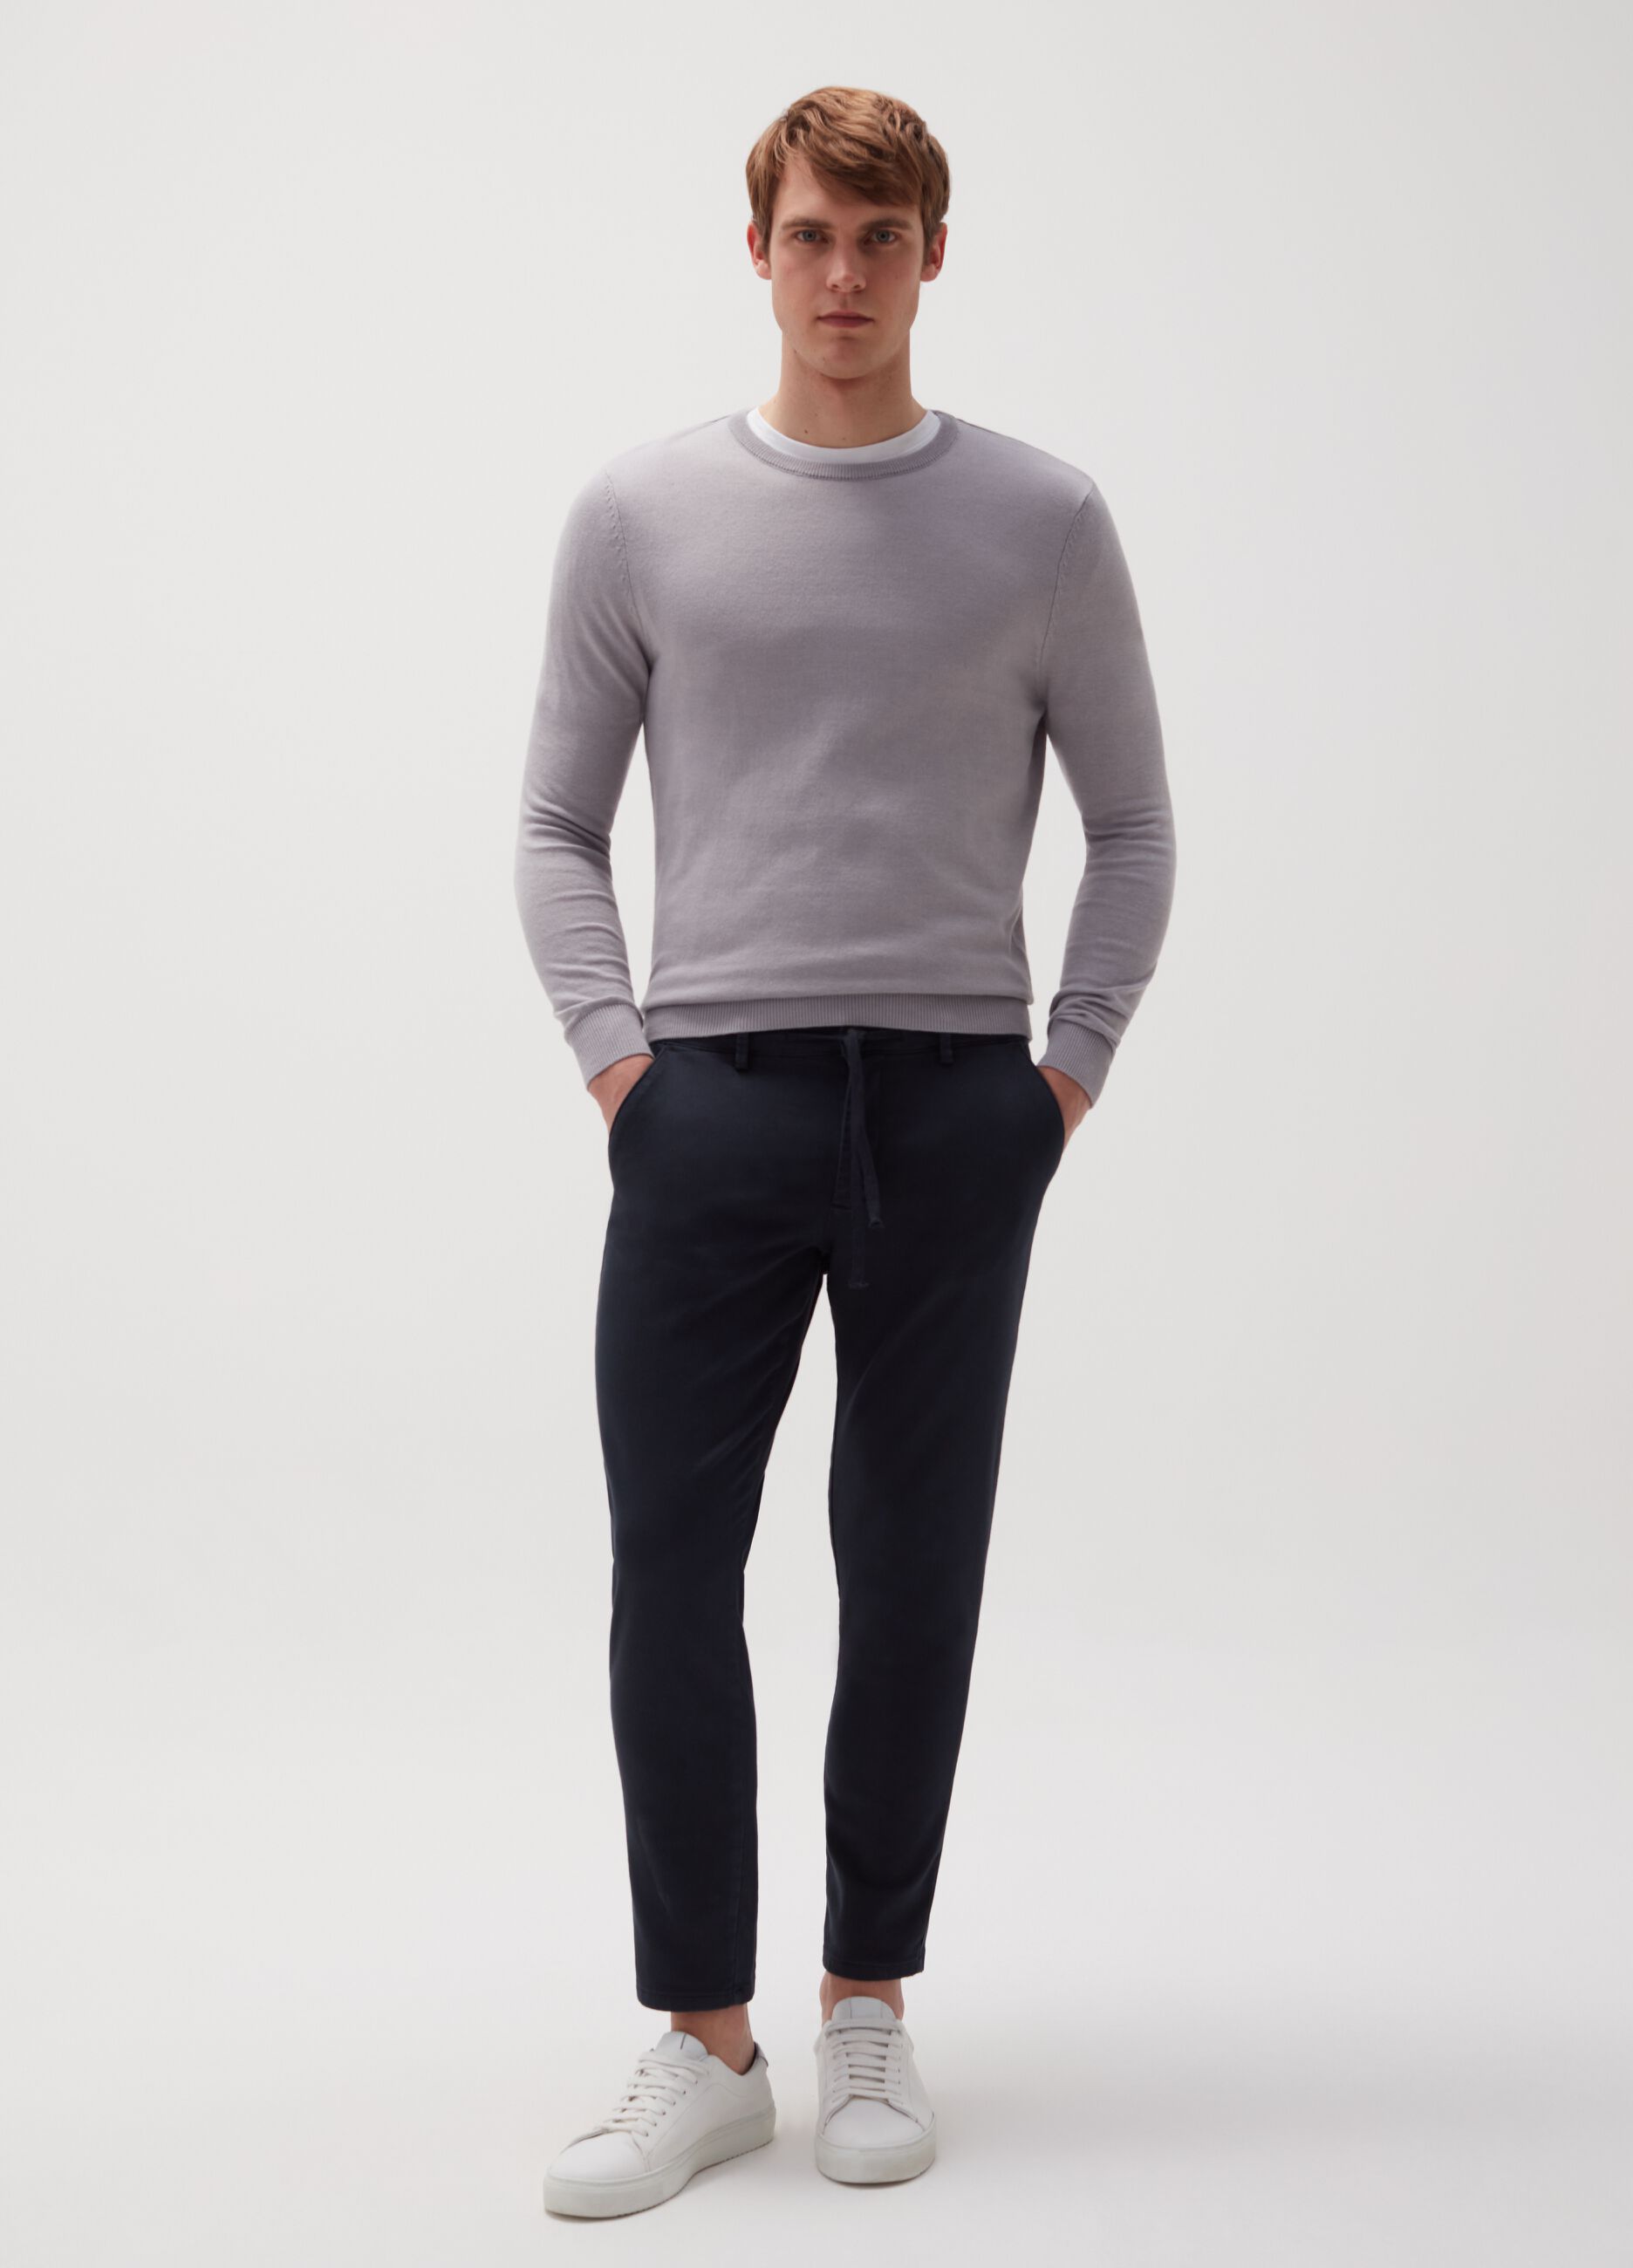 Relaxed-fit chino trousers